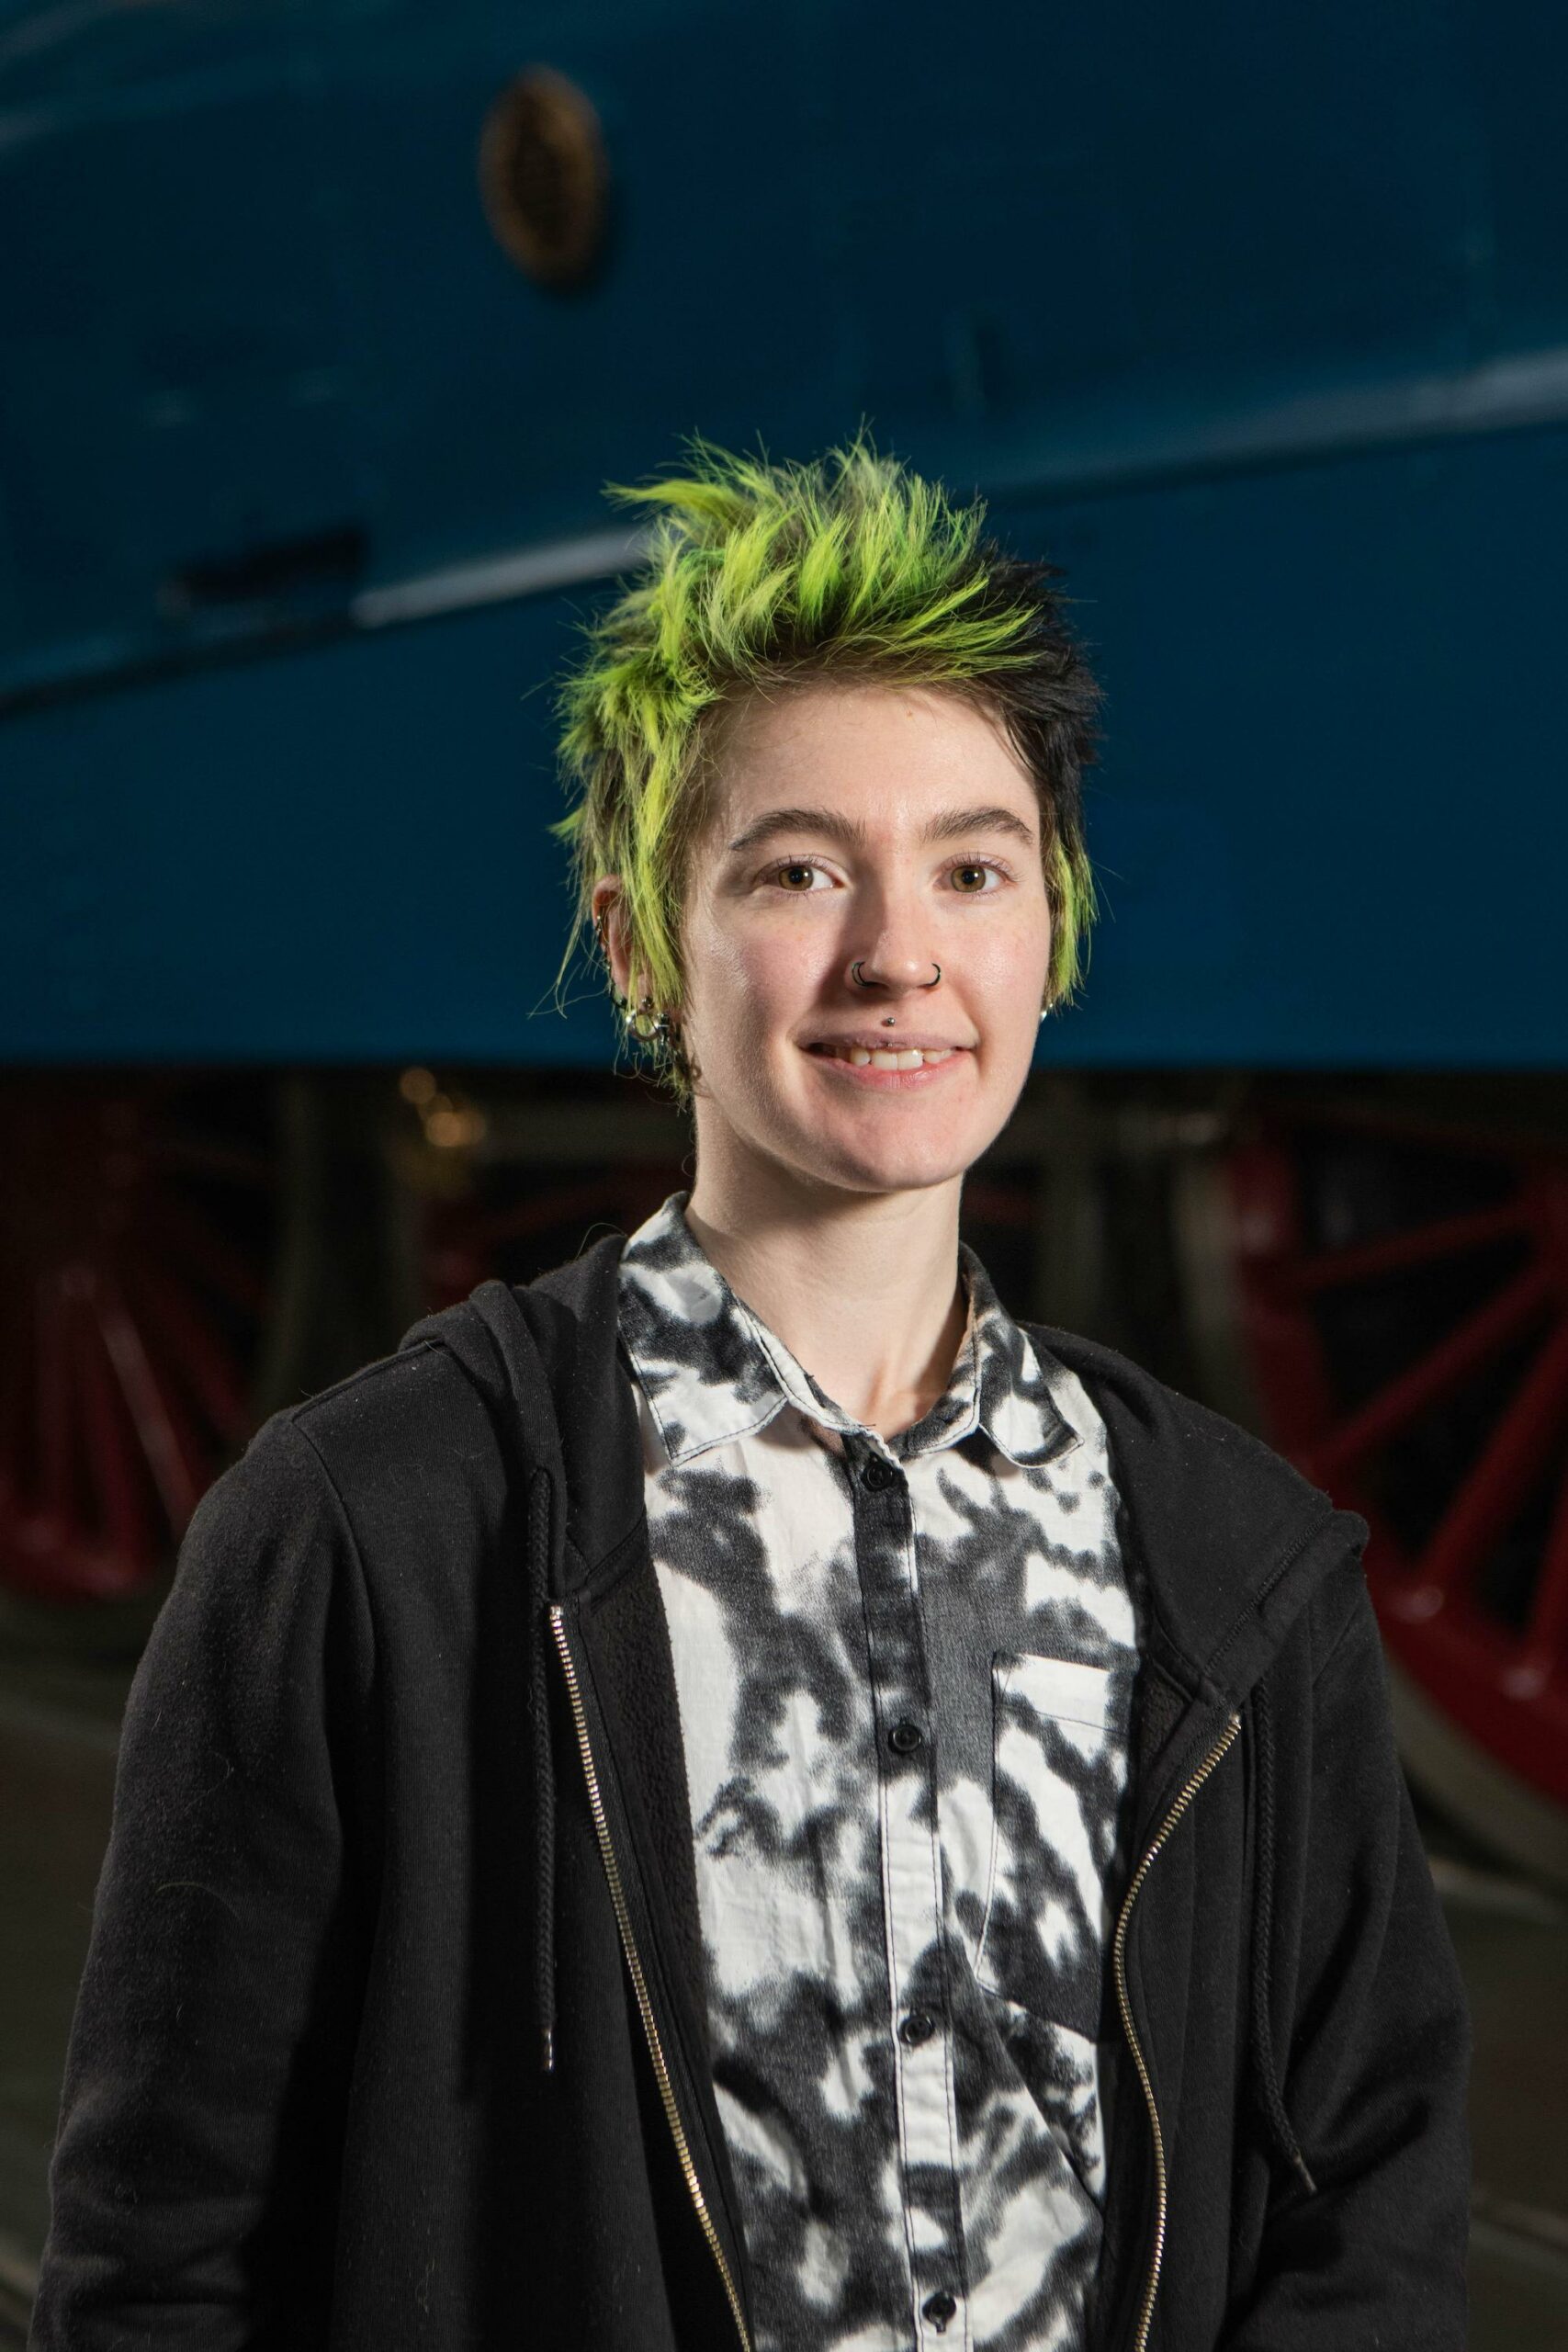 A young woman with short green hair. She is wearing a patterned shirt and black hoodie.